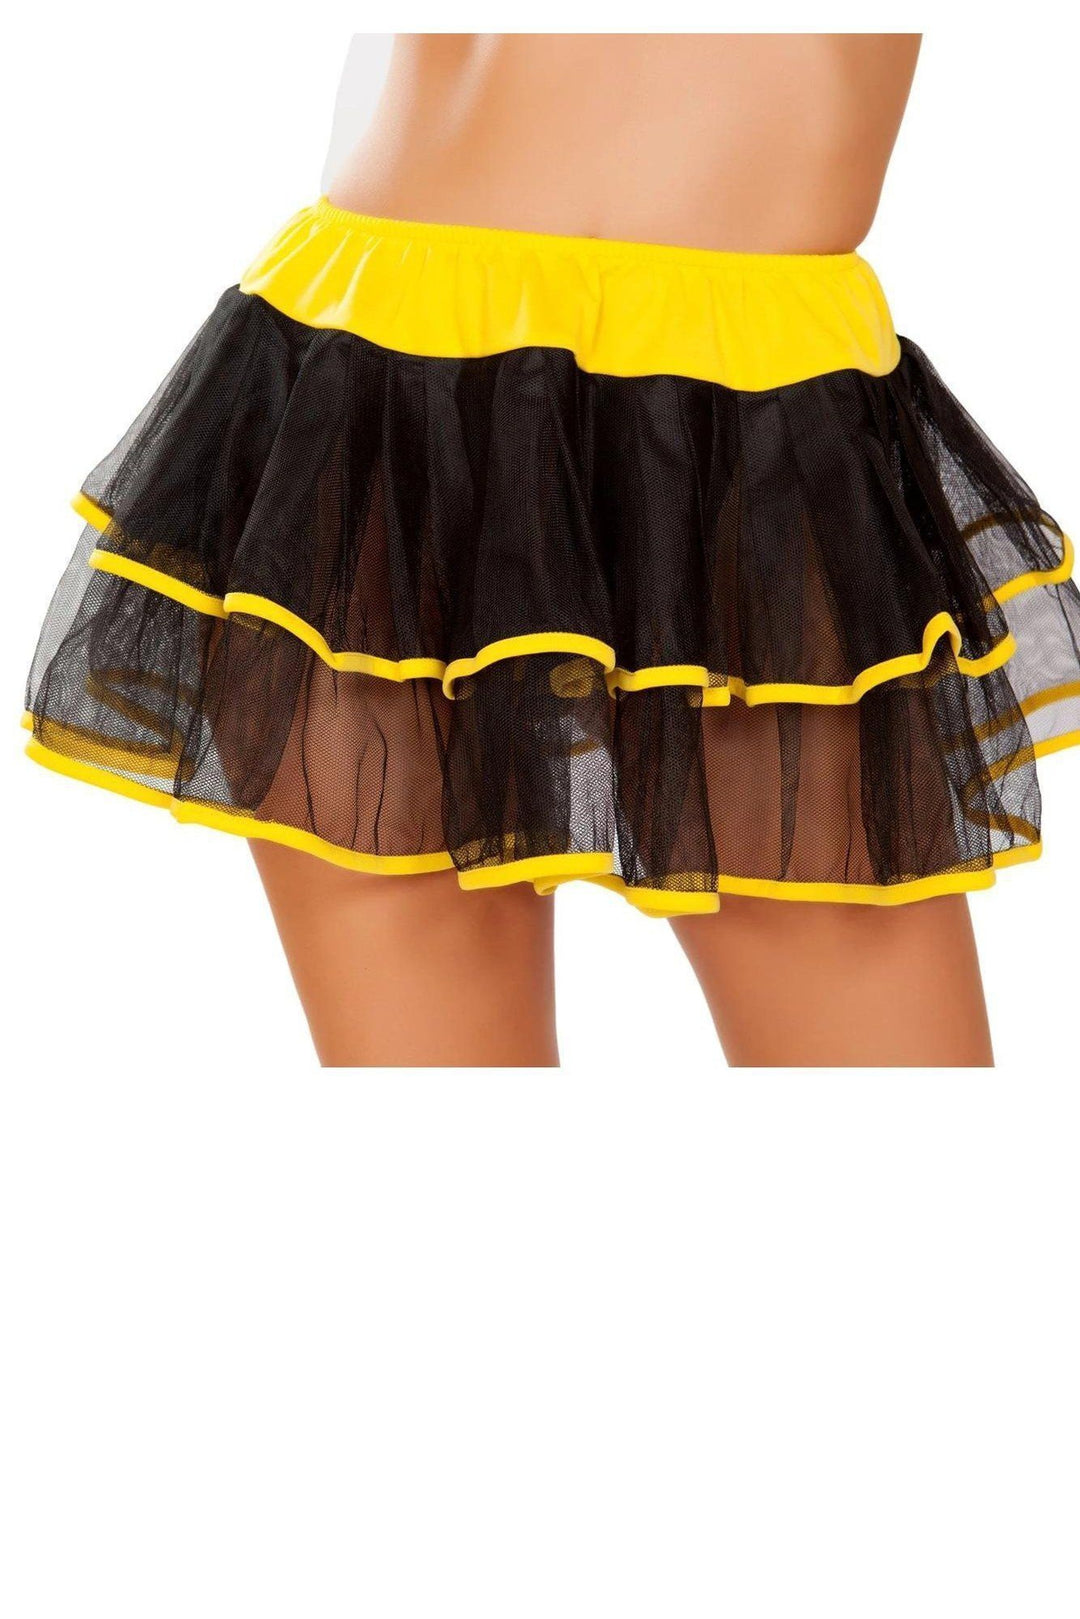 Roma Double Layer Petticoat Costume-SEXYSHOES.COM